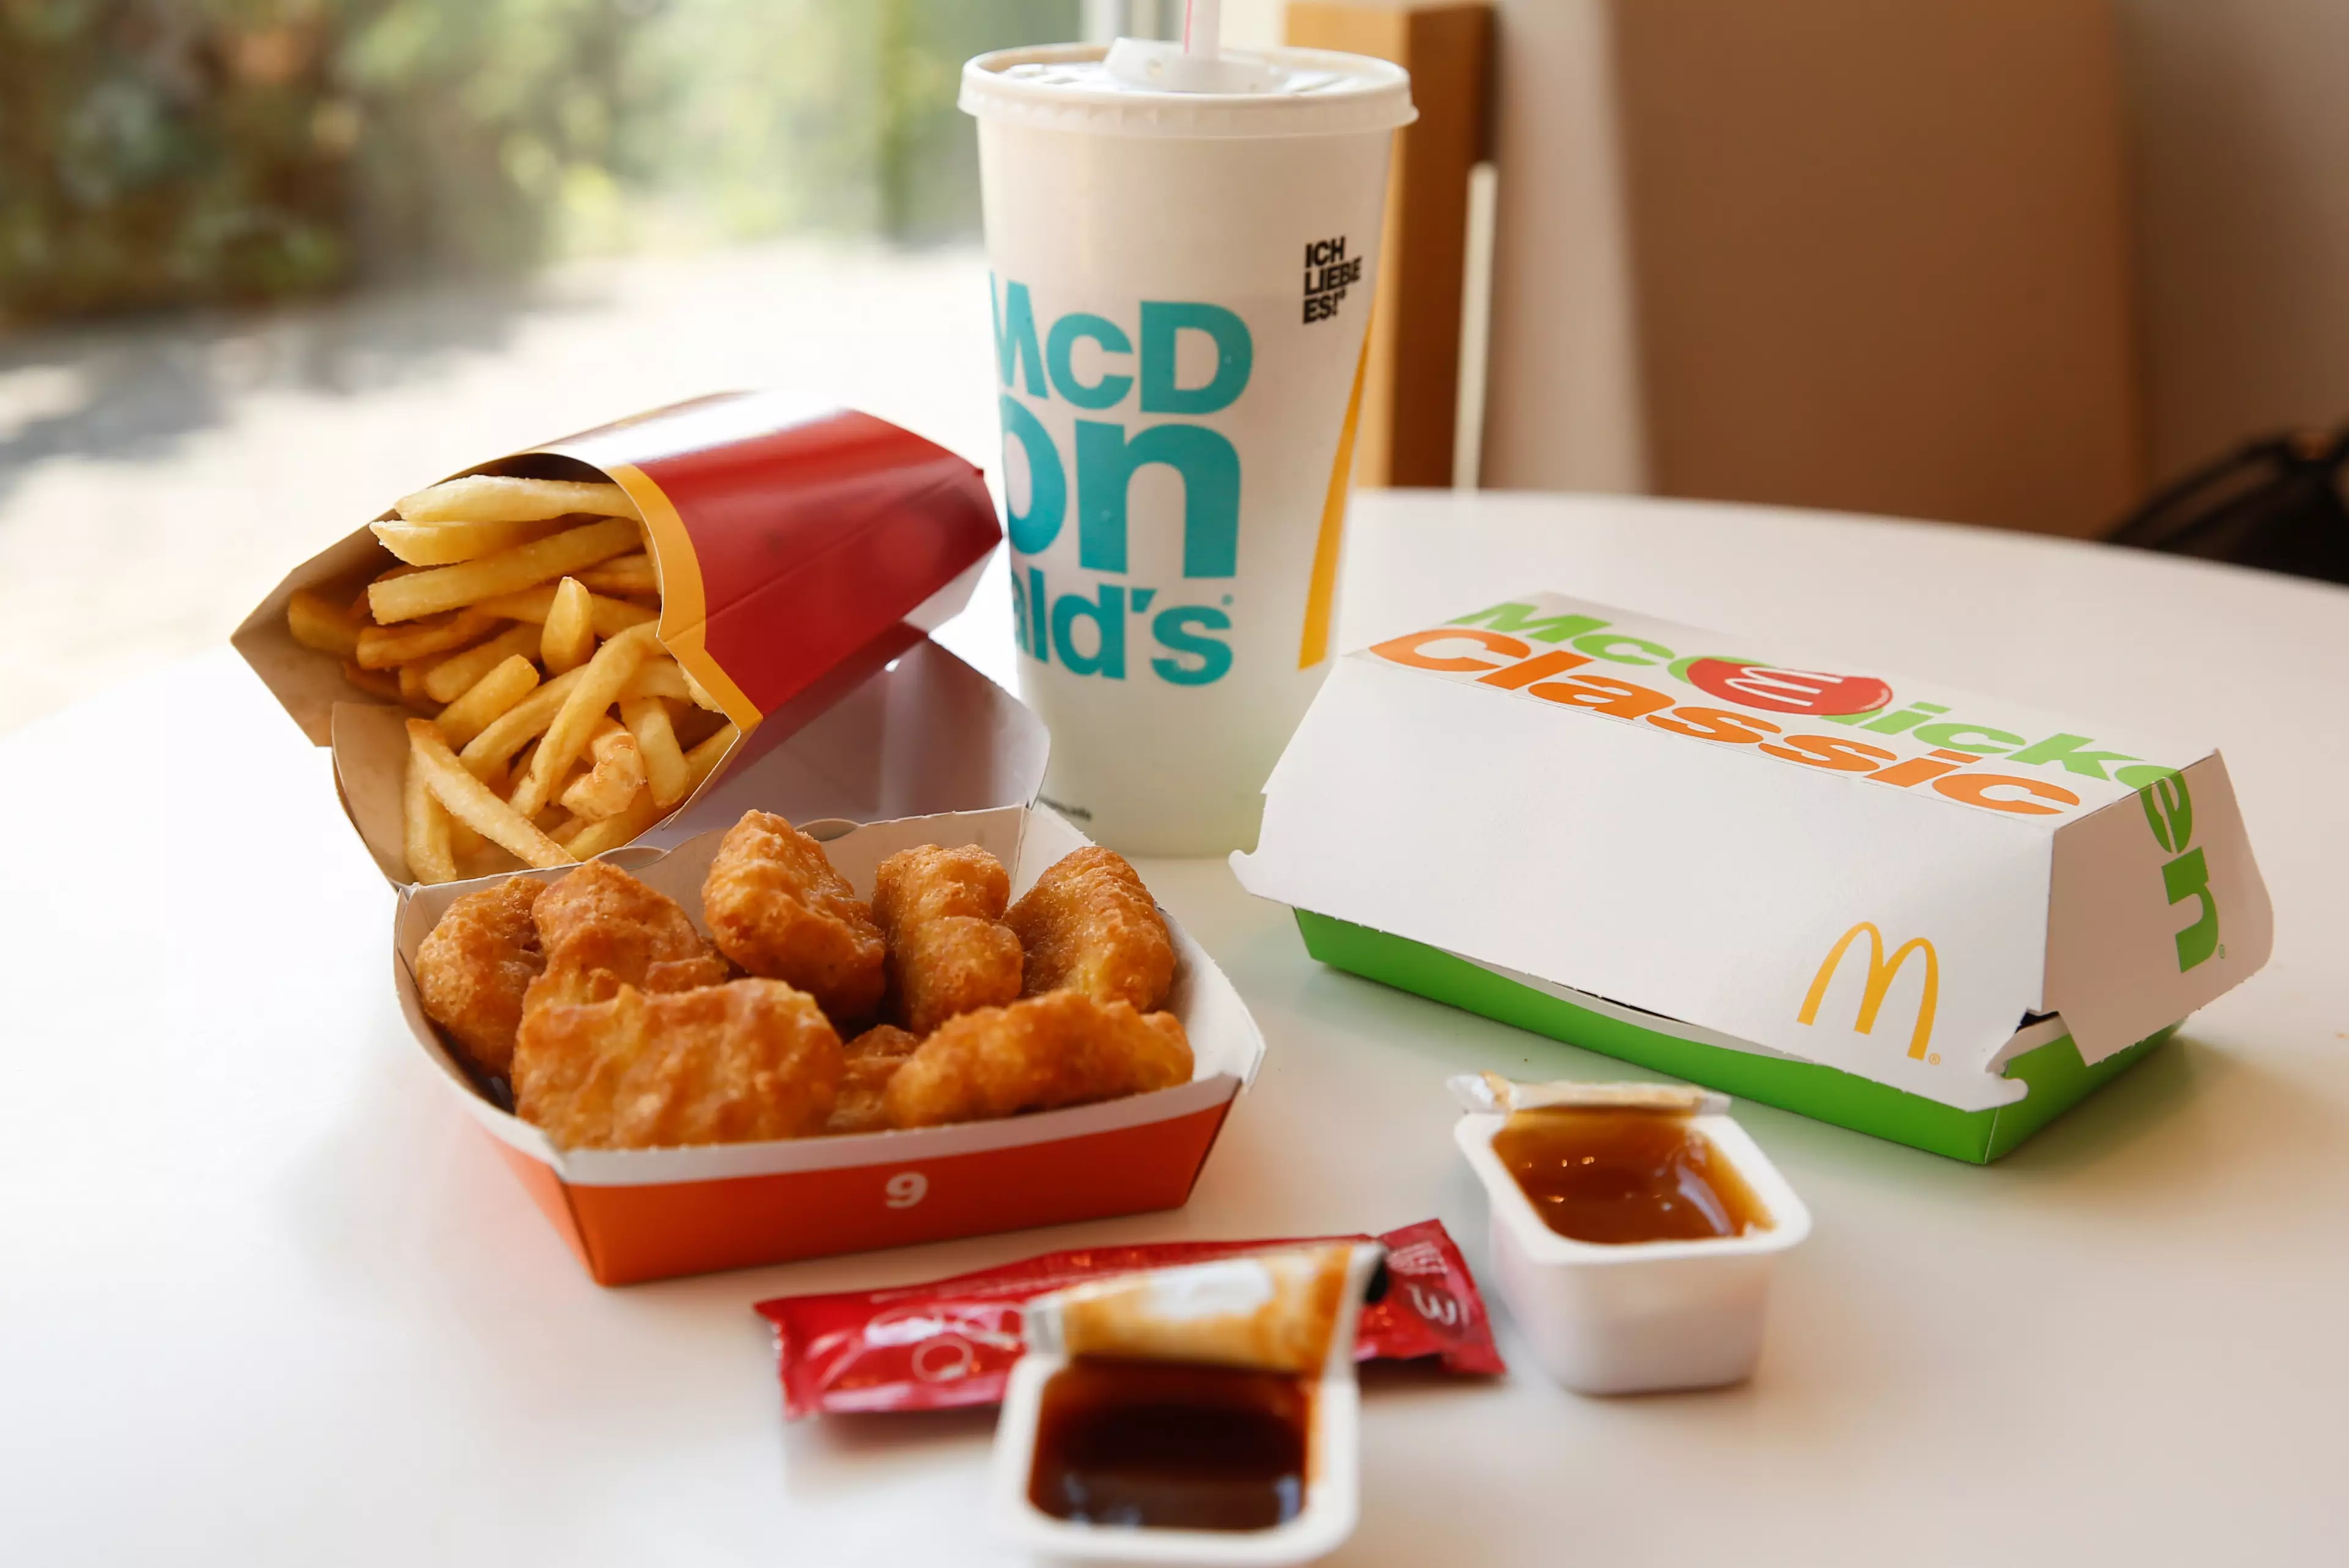 We do love a McDonald's freebie and the offers are happening all week long (